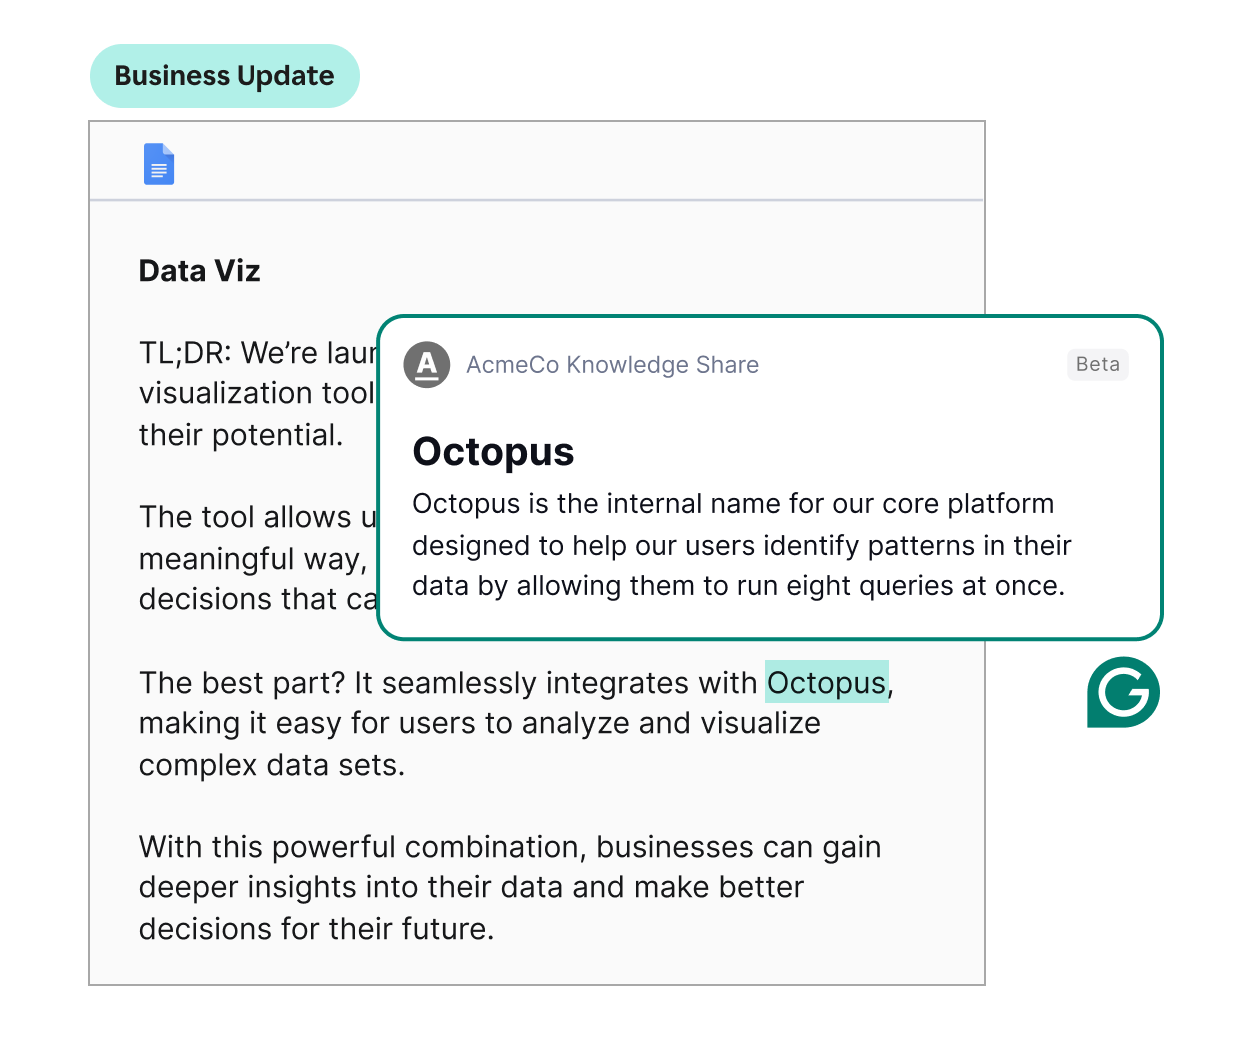 Grammarly shows a feature to share institutional knowledge